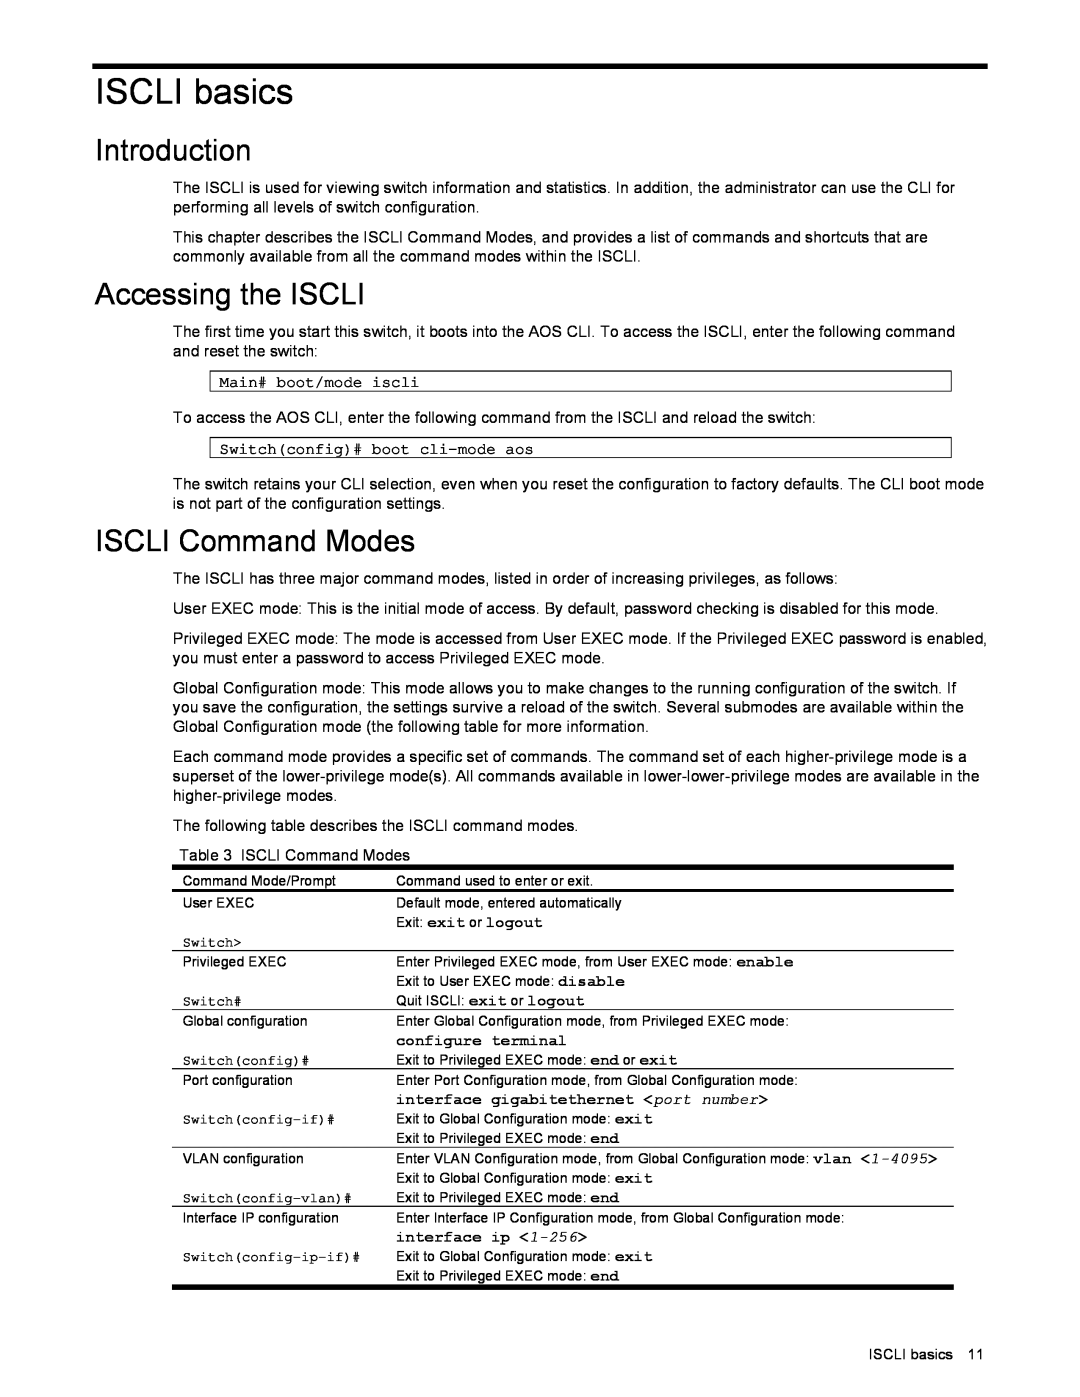 NEC N8406-022 manual ISCLI basics, Accessing the ISCLI, ISCLI Command Modes, Introduction 